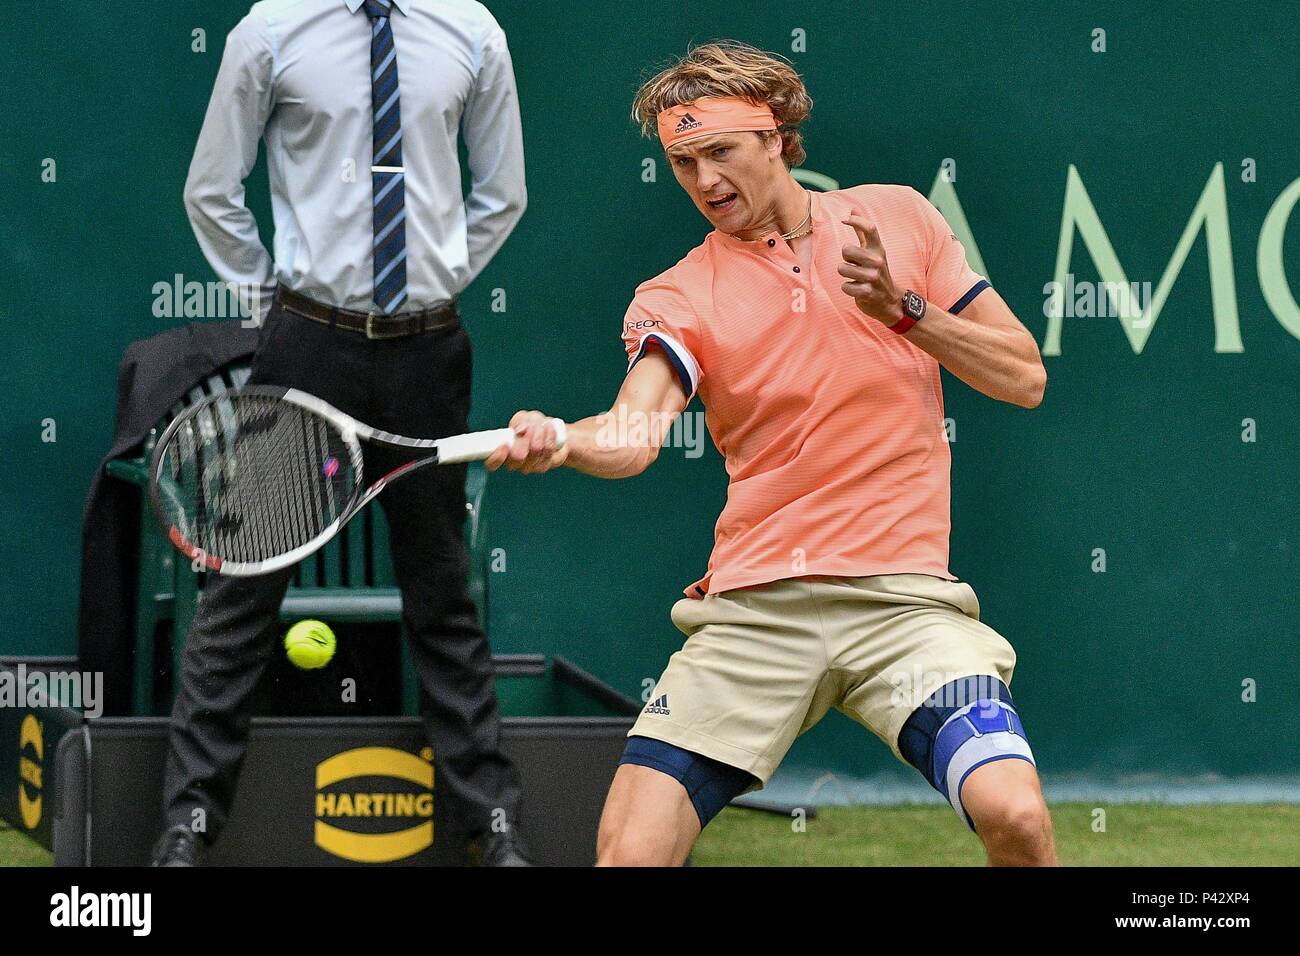 Halle, Germany. 20 June 2018 Gerry Weber Stadium, Halle/Westphalia, GER,  ATP World Tour 500 Event, 26th Gerry Weber Open 2018 from 18.-24. June, in  the picture Alexander Zverev (GER) at the forehand